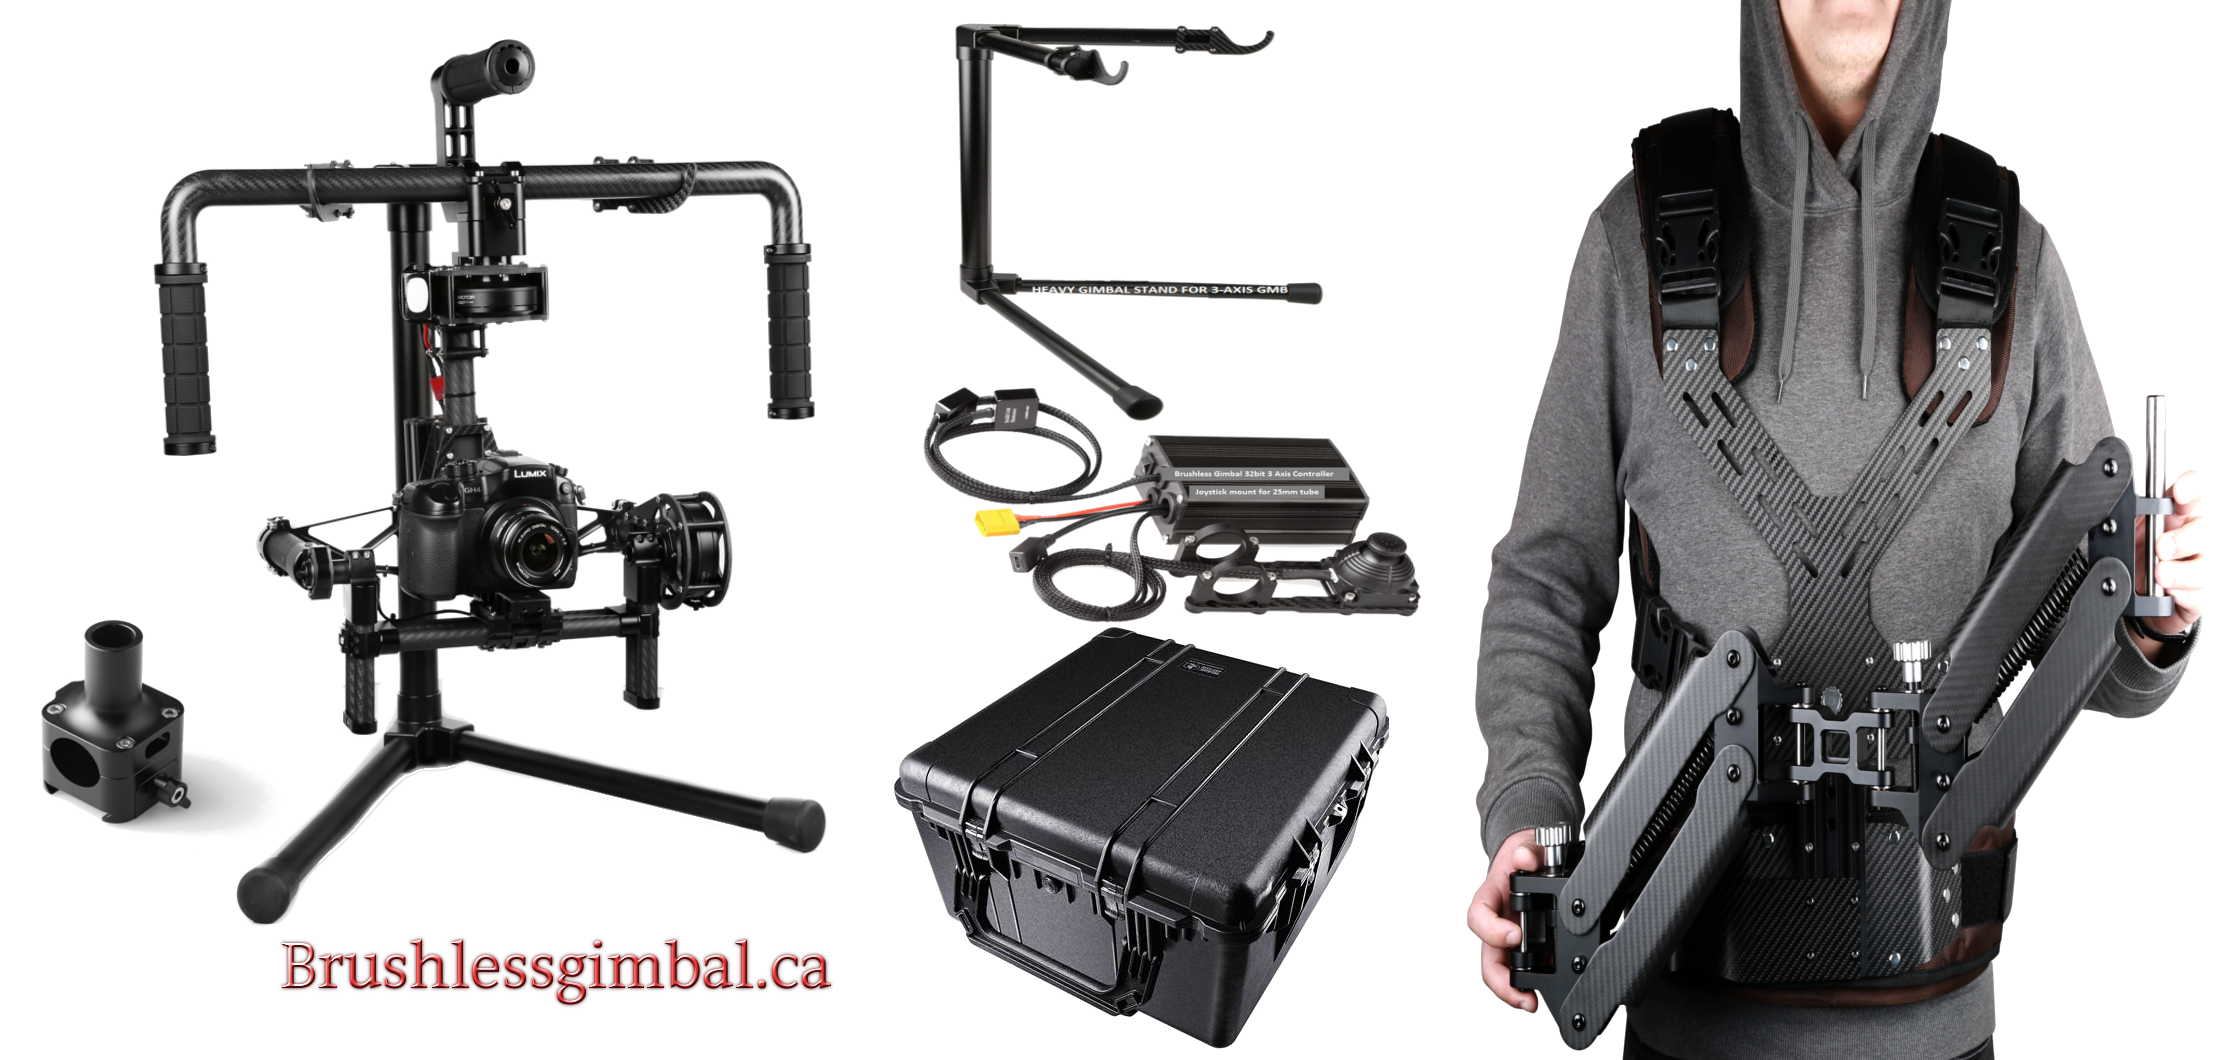 3 axis BGC Gimbal system & Steady cam Vest kit with carry case